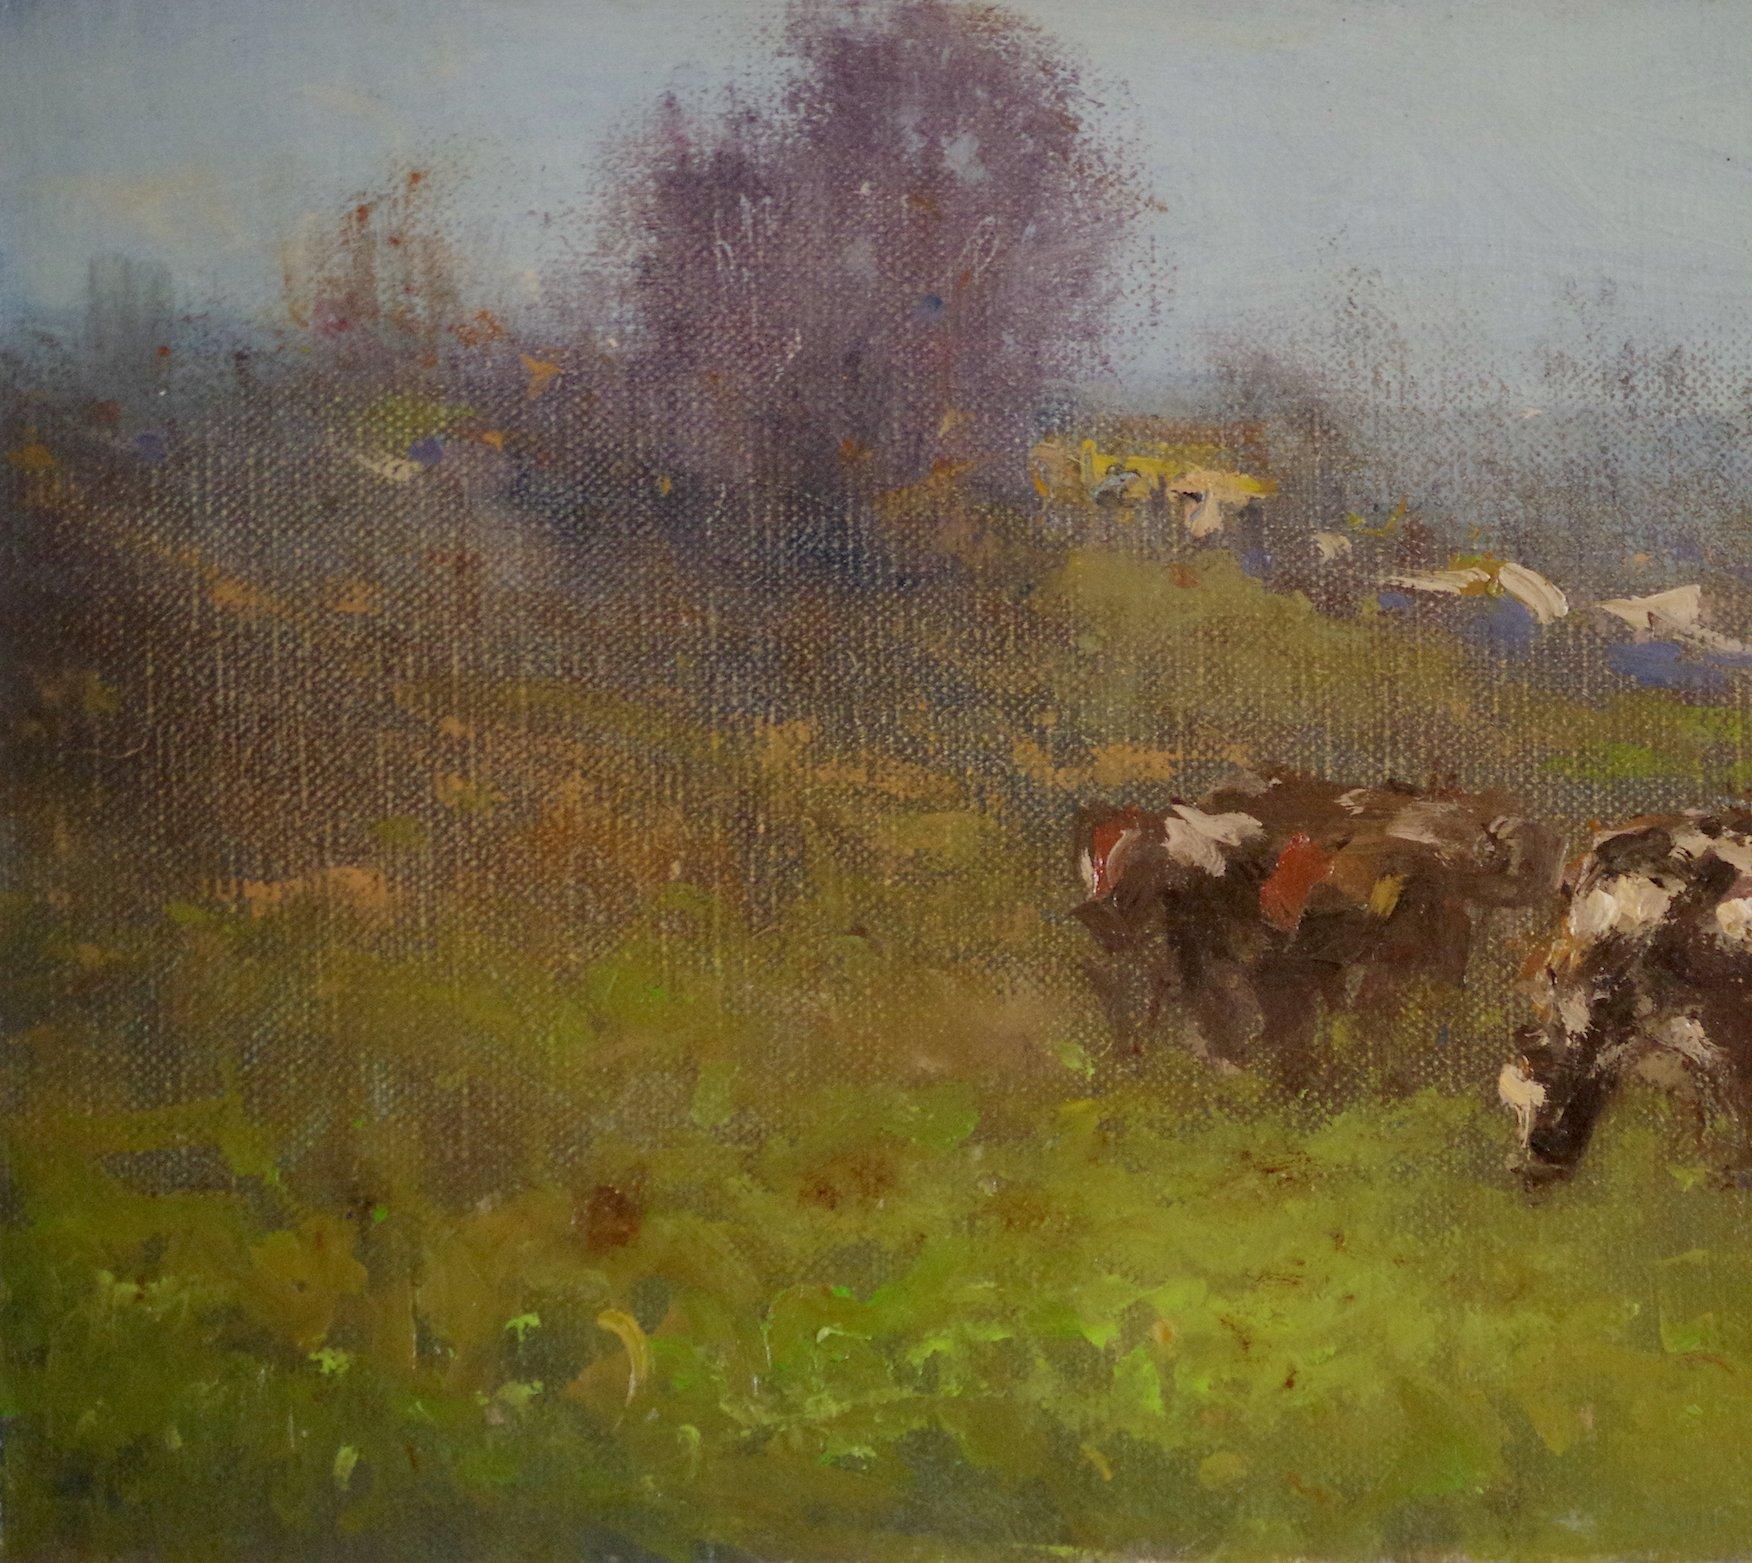 Cows in the Meadow - Brown Landscape Painting by Karen Darbinyan